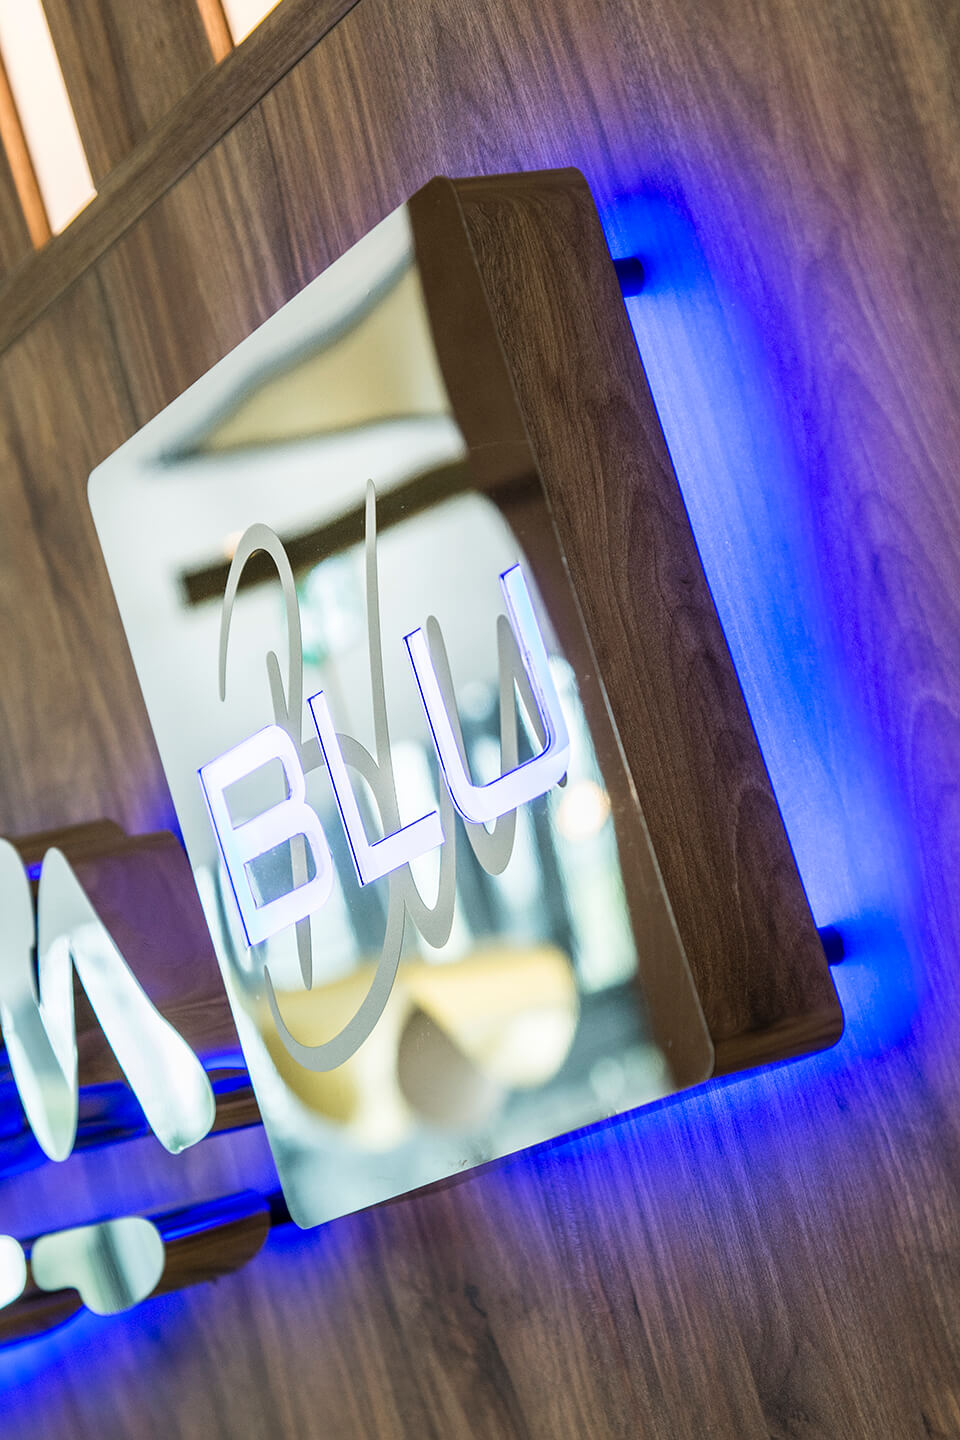 Radisson Sopot blu hotel - radisson-blue-letters-in-stainless-steel-literal-lettering-behind-reception-in-hotel-on-a-wood-wall-literal-lettering-literal-illuminated-from-behind-on-blue-sopot-logo-firm-literal-lettering-exclusive-glamour